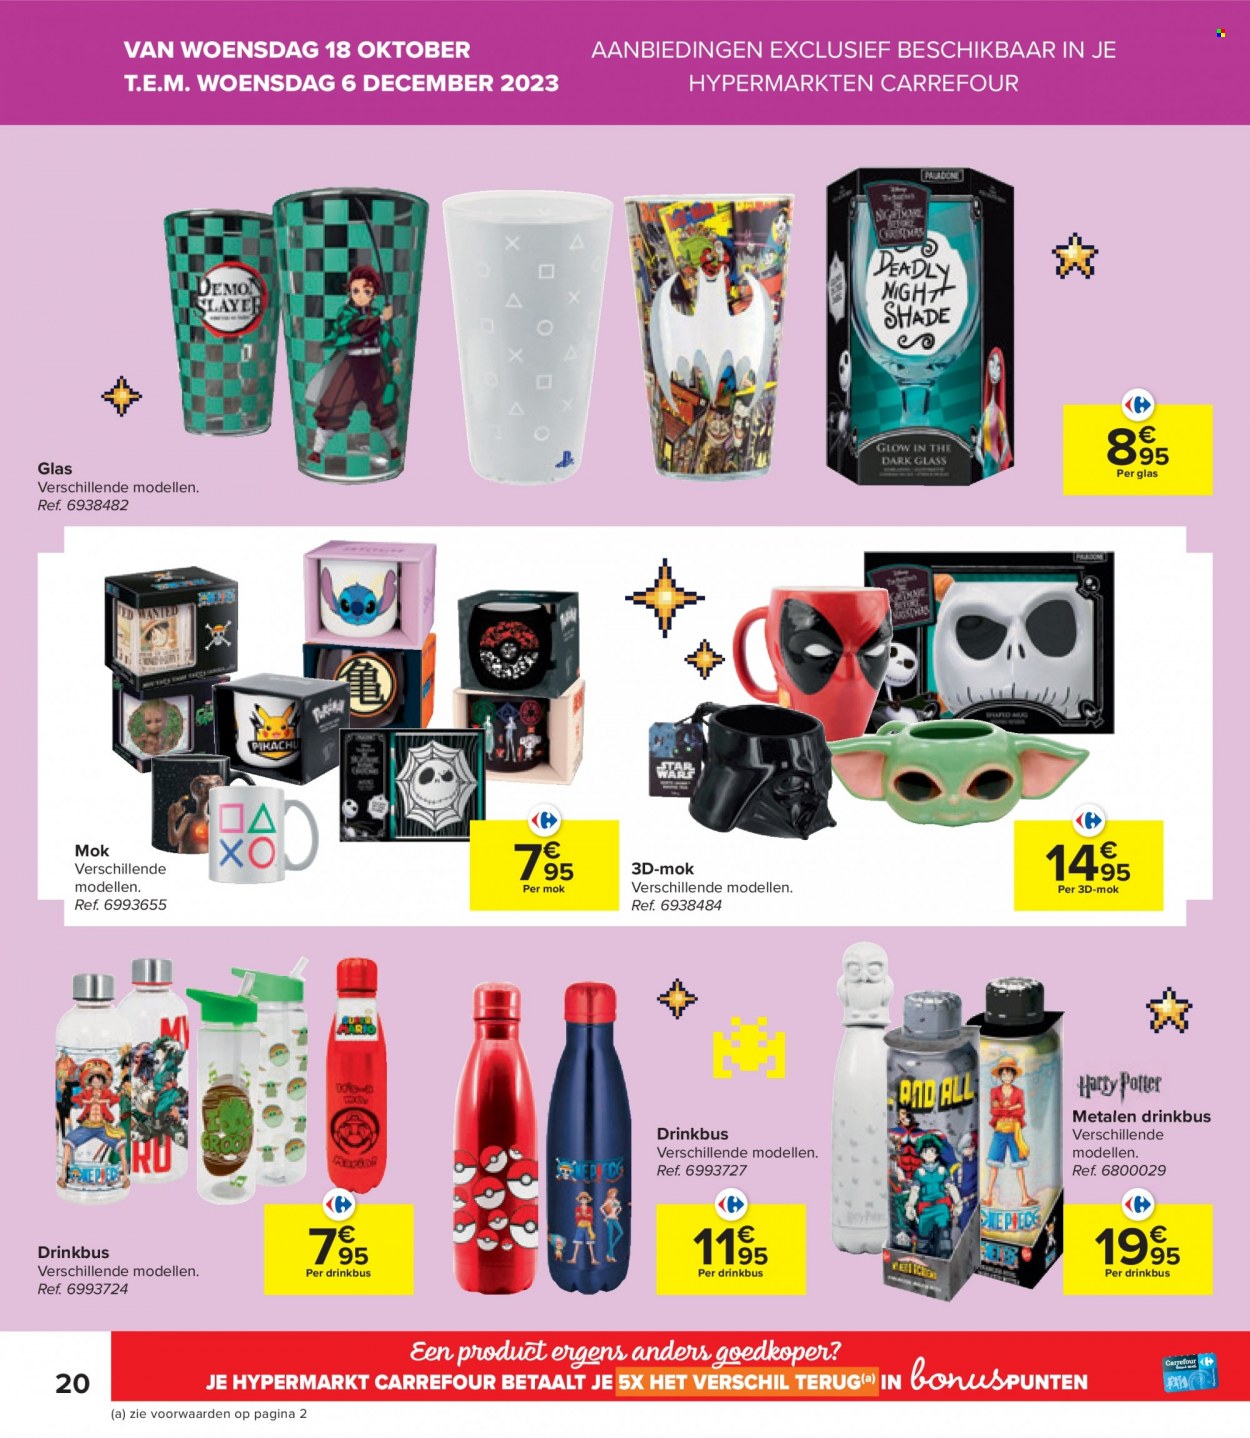 Catalogue Carrefour hypermarkt - 18.10.2023 - 6.12.2023. Page 20.